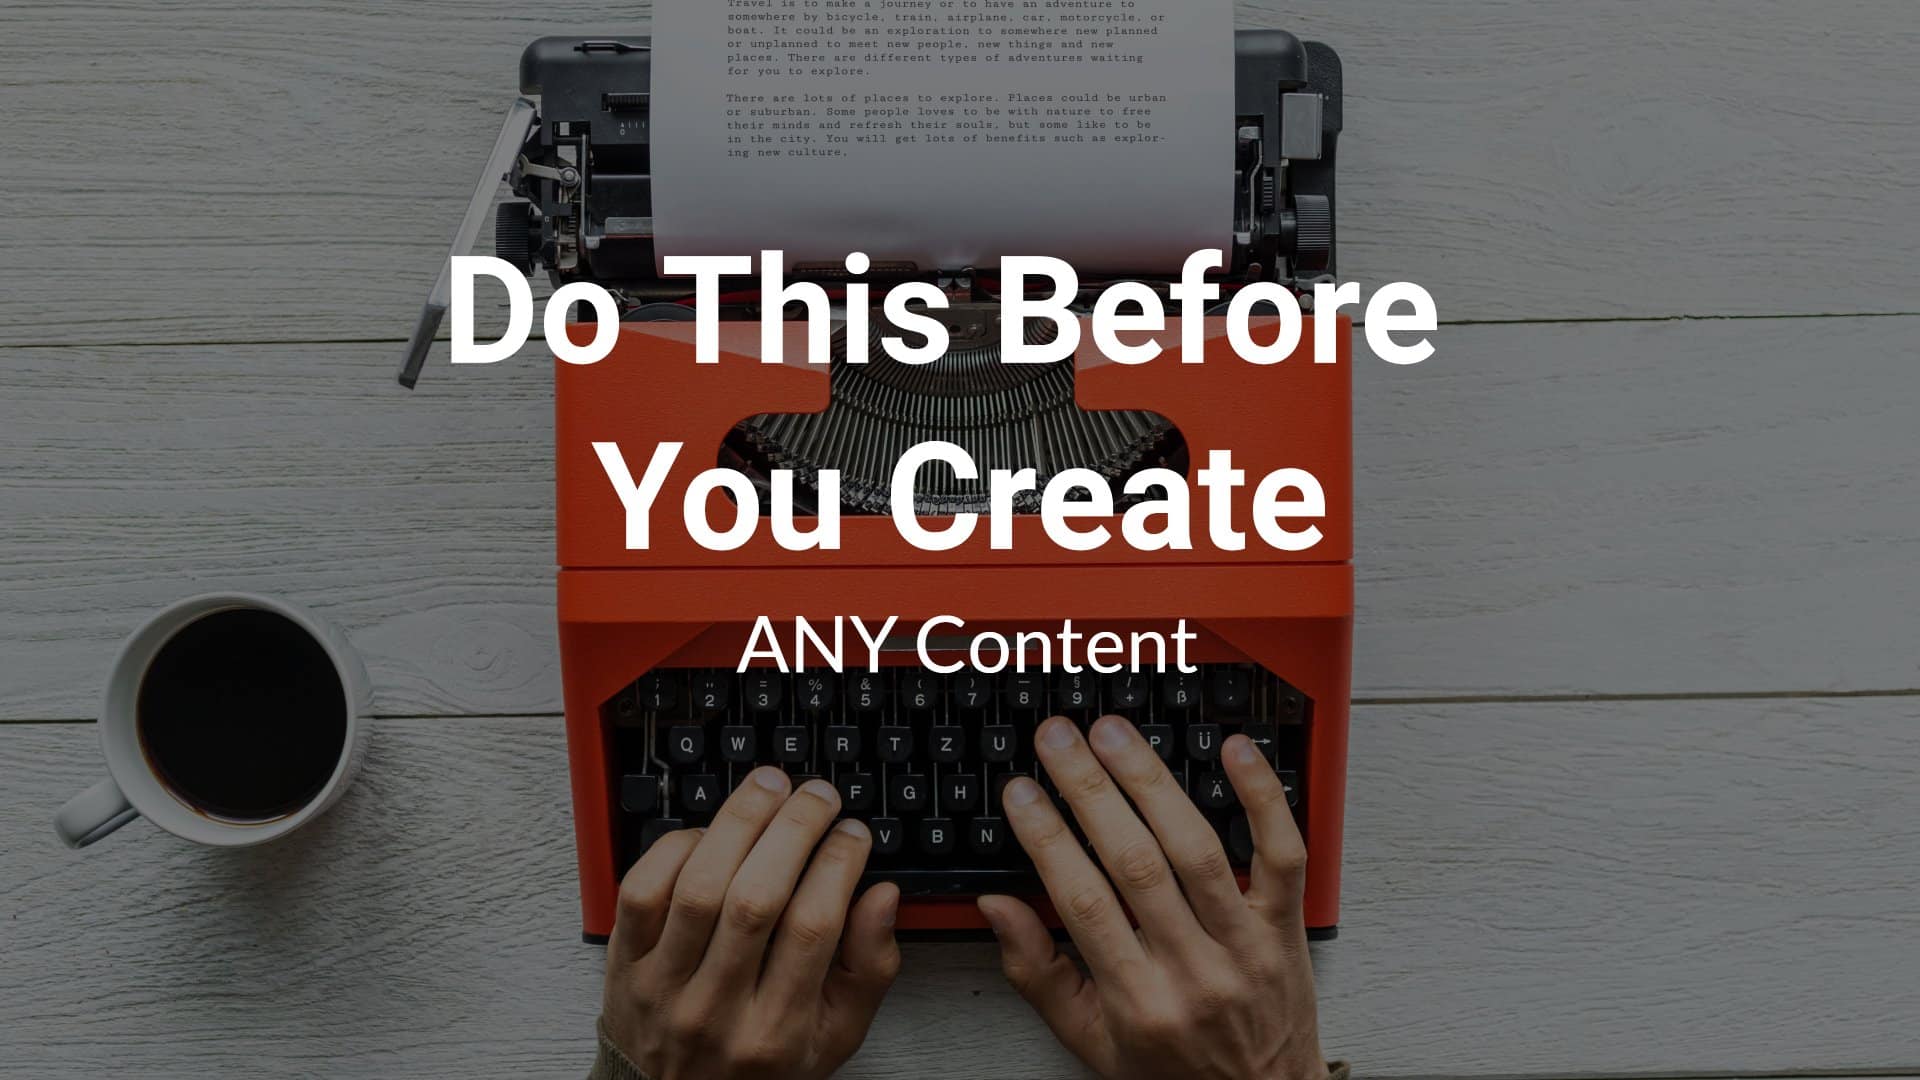 Do this before to write content